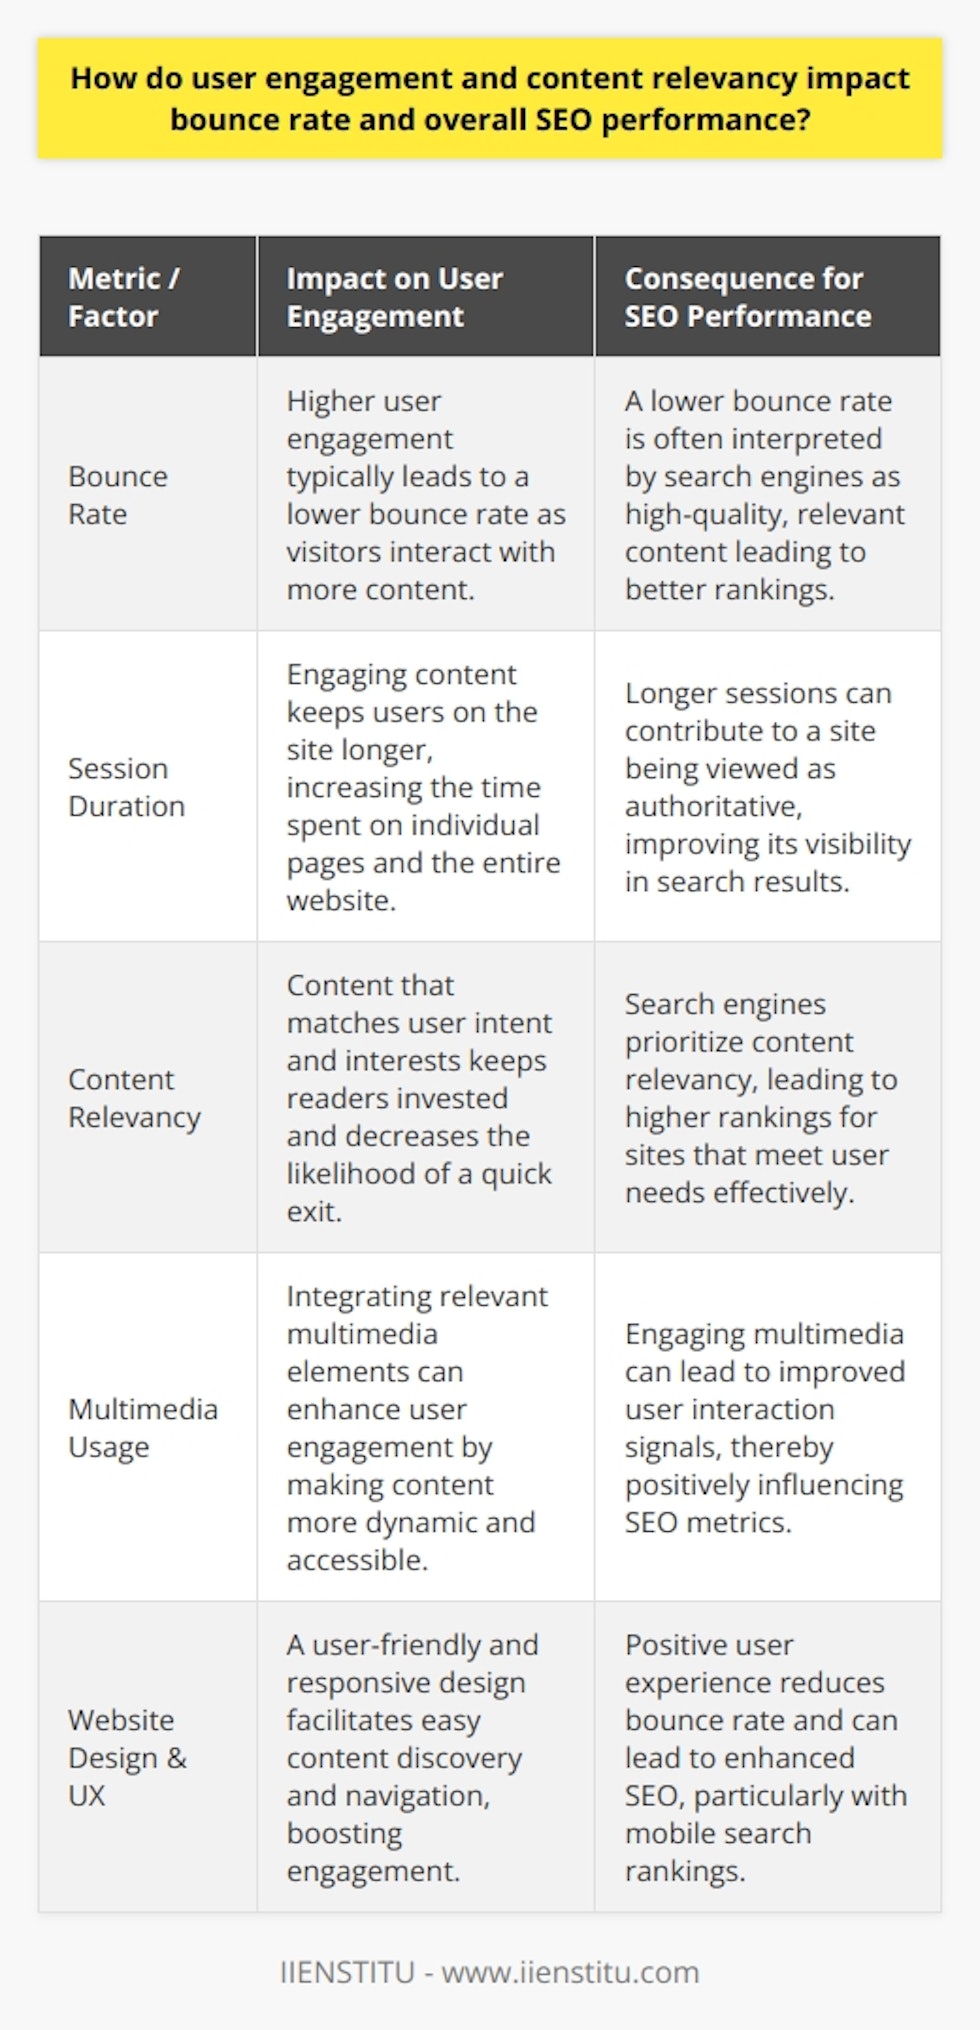 User engagement and content relevancy are pivotal factors that influence the bounce rate of a website, which in turn plays a significant role in the site’s overall SEO performance. Engaged users indicate to search engines that the content provided is of high quality and matches the users’ search intent. Consequently, this interaction can lead to a lower bounce rate, which is the percentage of visitors who navigate away from the site after viewing only one page.When users engage deeply with content, it typically results in longer session durations. This involves reading the blog post thoroughly, clicking on internal links, and possibly leaving comments or sharing the content on social media. Engaged users are also more likely to visit additional pages on the site, further reducing the bounce rate. These metrics are valuable to search engines, as they signal that users find the content satisfying and helpful, which can lead to improved search rankings.Content relevancy is intrinsically linked to user engagement. A blog post that aligns well with the audience's interests and search queries is more likely to captivate readers, leading them to invest more time on the site. On the other hand, when content does not match a user's needs or expectations, they are more likely to exit quickly, inflating the bounce rate. This disconnection can be detrimental to SEO performance, as search engines interpret a high bounce rate as an indication that the site's content does not fulfill user queries effectively.To enhance user engagement, blog owners should consider integrating multimedia elements. These include high-quality images, informative videos, interactive infographics, and any other visual aids that complement the text. These elements can make blog posts more appealing, more accessible to process, and more memorable. But relevance is key—they should always support or add value to the written content.An optimal website design and a high-quality user experience also significantly impact user engagement and bounce rate. A user-friendly design ensures that visitors can effortlessly find the information they're seeking, which encourages them to explore the website further. Moreover, with the increasing prevalence of mobile browsing, it's crucial to have a responsive design that performs seamlessly across devices. This includes optimizing image sizes and improving page loading speeds to prevent users from leaving due to technical frustrations.In essence, fostering user engagement and ensuring content relevancy are not just about keeping visitors on the site but are strategic methods to enhance SEO outcomes. By blending captivating, relevant content with a seamless user experience and multimedia elements, blog owners and digital marketers can effectively lower bounce rates. This leads to a healthier, more authoritative site profile in the eyes of search engines, resulting in stronger SEO performance and higher rankings in SERPs.